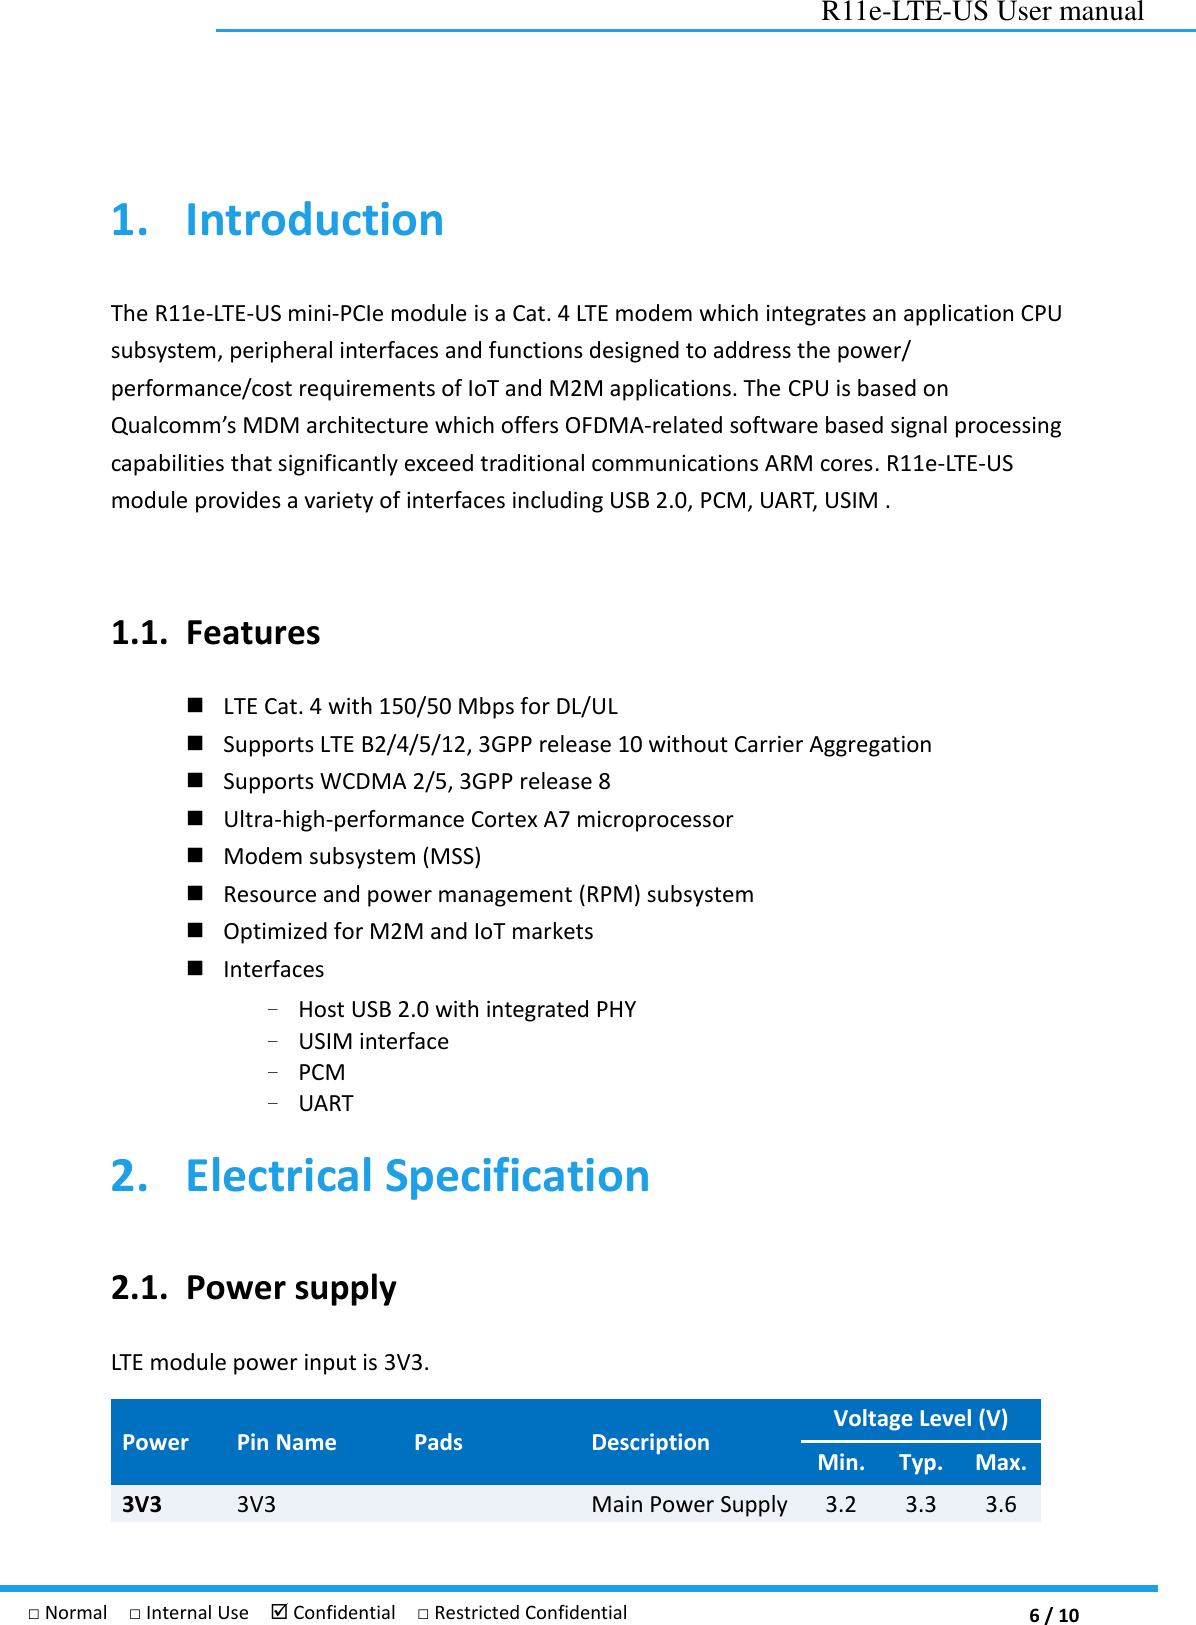  6 / 10 R11e-LTE-US User manual □ Normal  □ Internal Use   Confidential  □ Restricted Confidential 1. Introduction The R11e-LTE-US mini-PCIe module is a Cat. 4 LTE modem which integrates an application CPU subsystem, peripheral interfaces and functions designed to address the power/ performance/cost requirements of IoT and M2M applications. The CPU is based on Qualcomm’s MDM architecture which offers OFDMA-related software based signal processing capabilities that significantly exceed traditional communications ARM cores. R11e-LTE-US module provides a variety of interfaces including USB 2.0, PCM, UART, USIM .    1.1. Features  LTE Cat. 4 with 150/50 Mbps for DL/UL  Supports LTE B2/4/5/12, 3GPP release 10 without Carrier Aggregation  Supports WCDMA 2/5, 3GPP release 8  Ultra-high-performance Cortex A7 microprocessor    Modem subsystem (MSS)    Resource and power management (RPM) subsystem  Optimized for M2M and IoT markets    Interfaces   – Host USB 2.0 with integrated PHY – USIM interface   – PCM – UART 2. Electrical Specification 2.1. Power supply LTE module power input is 3V3.   Power   Pin Name Pads Description Voltage Level (V) Min. Typ. Max. 3V3 3V3  Main Power Supply 3.2 3.3 3.6 